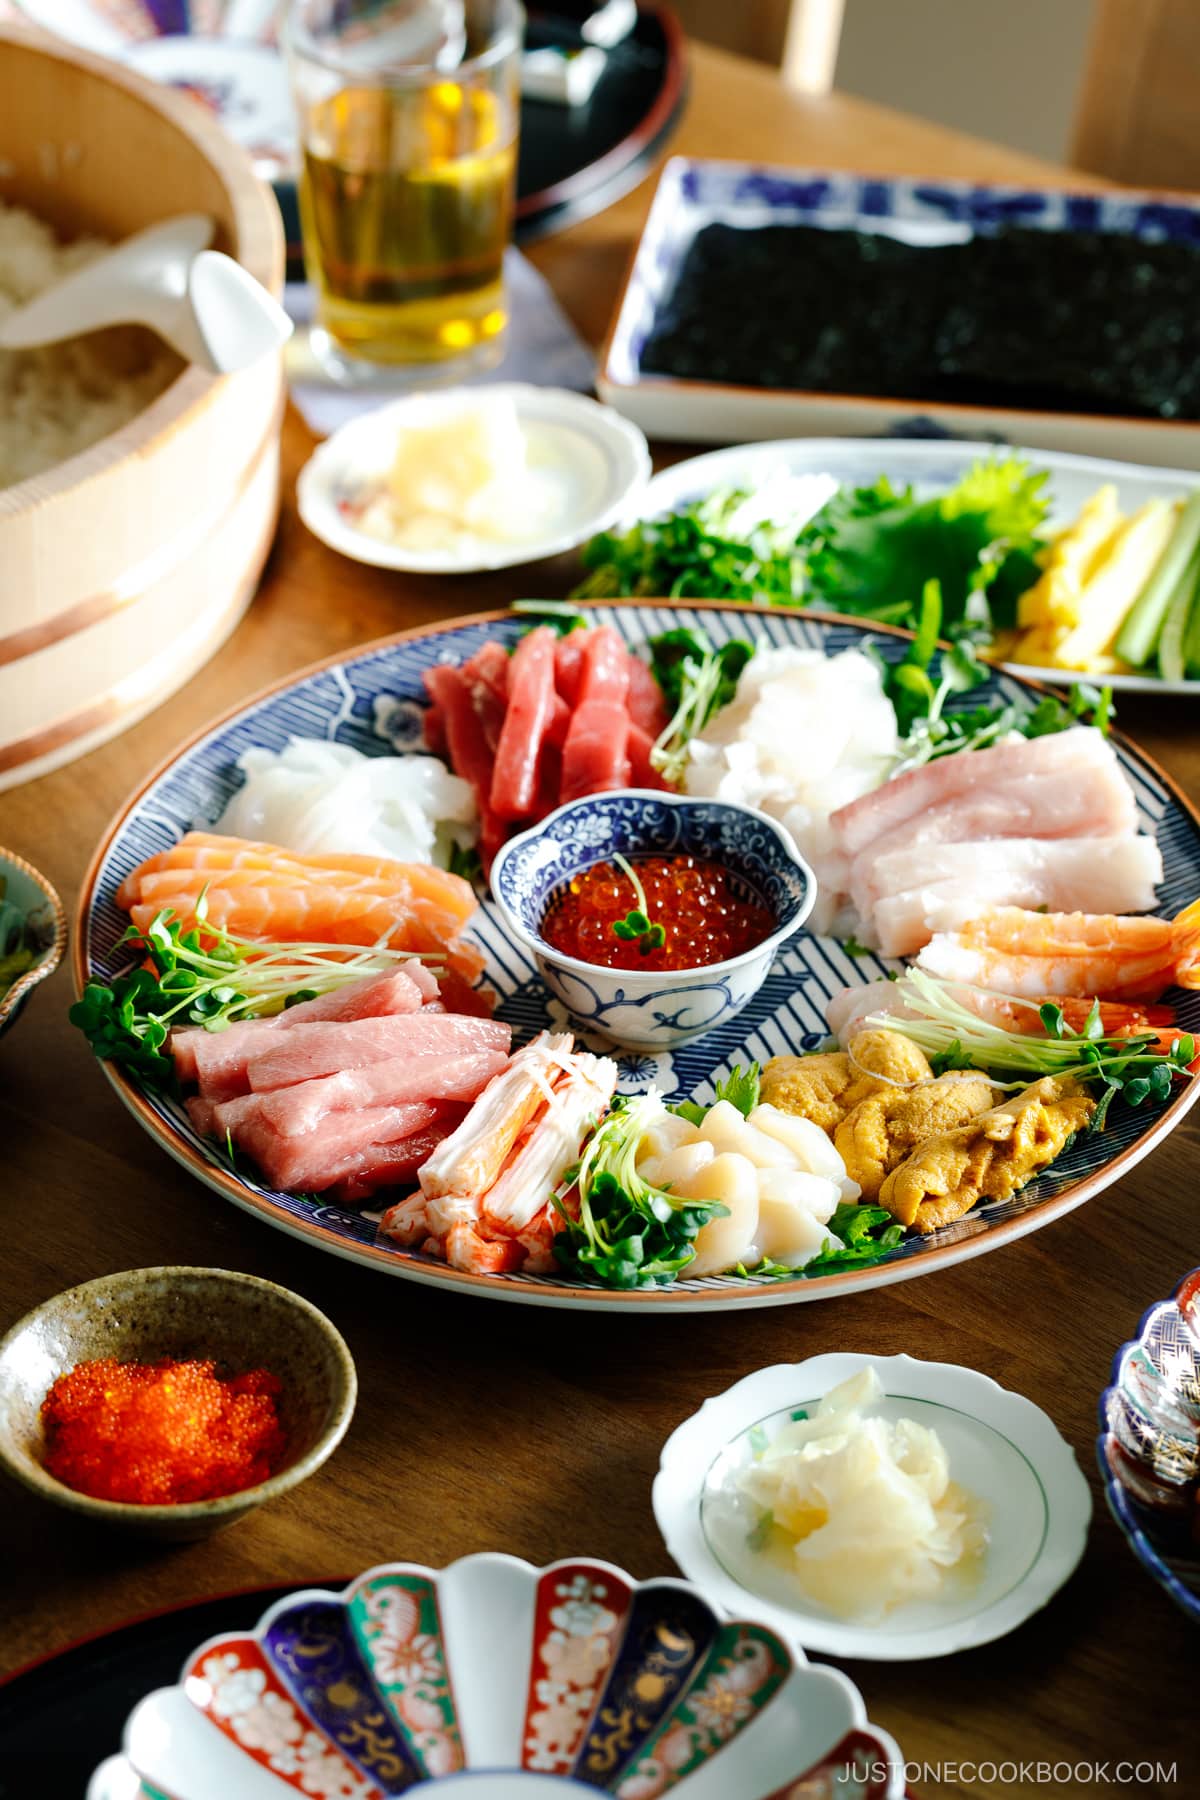 A temaki hand roll sushi spread on the dining table, consisting of plates and bowls containing sushi rice, sashimi, vegetable fillings, and nori seaweed.